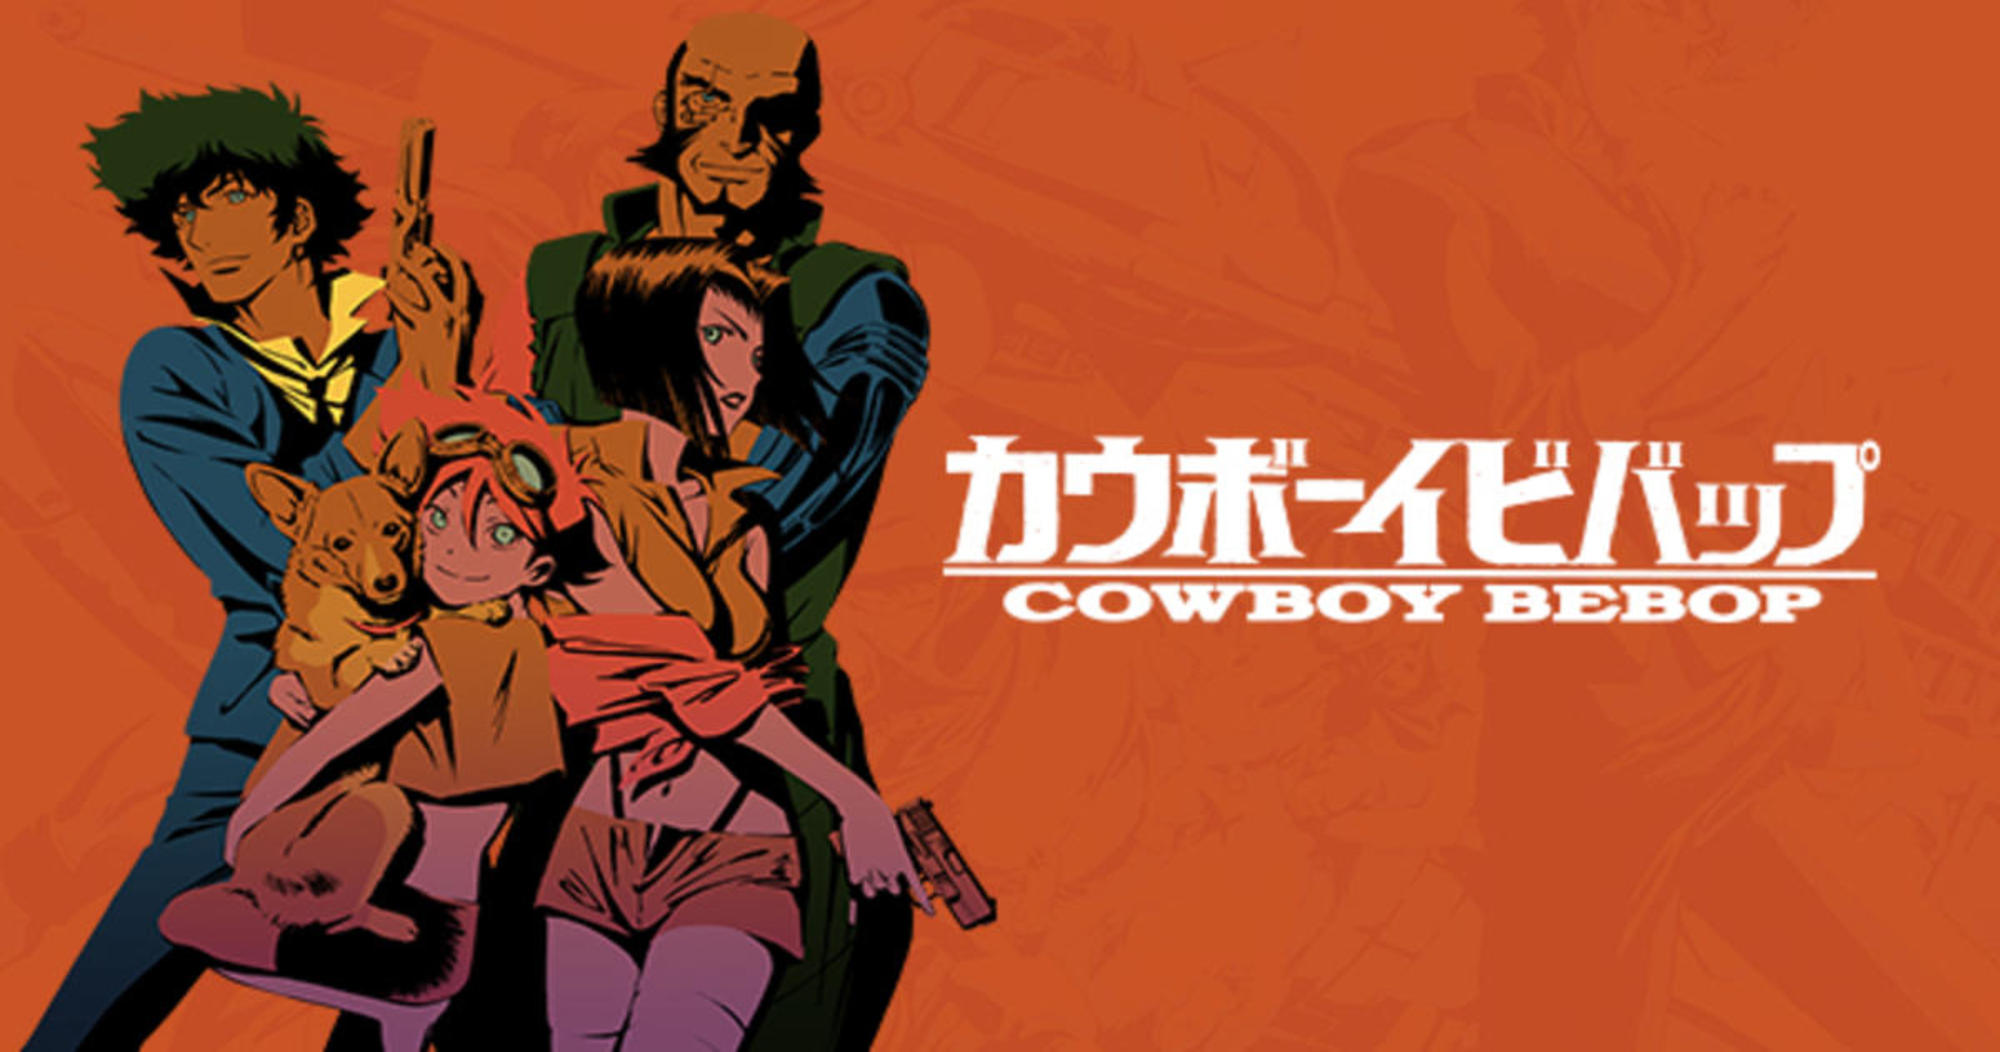 A picture of the main Cowboy Bebop (1998) cast-- from left to right, there's Spike Spiegel, Ein the Data Dog, Radical Edward, Fay Valentine, and Jet Black next to the words "Cowboy Bebop" against an orange background.